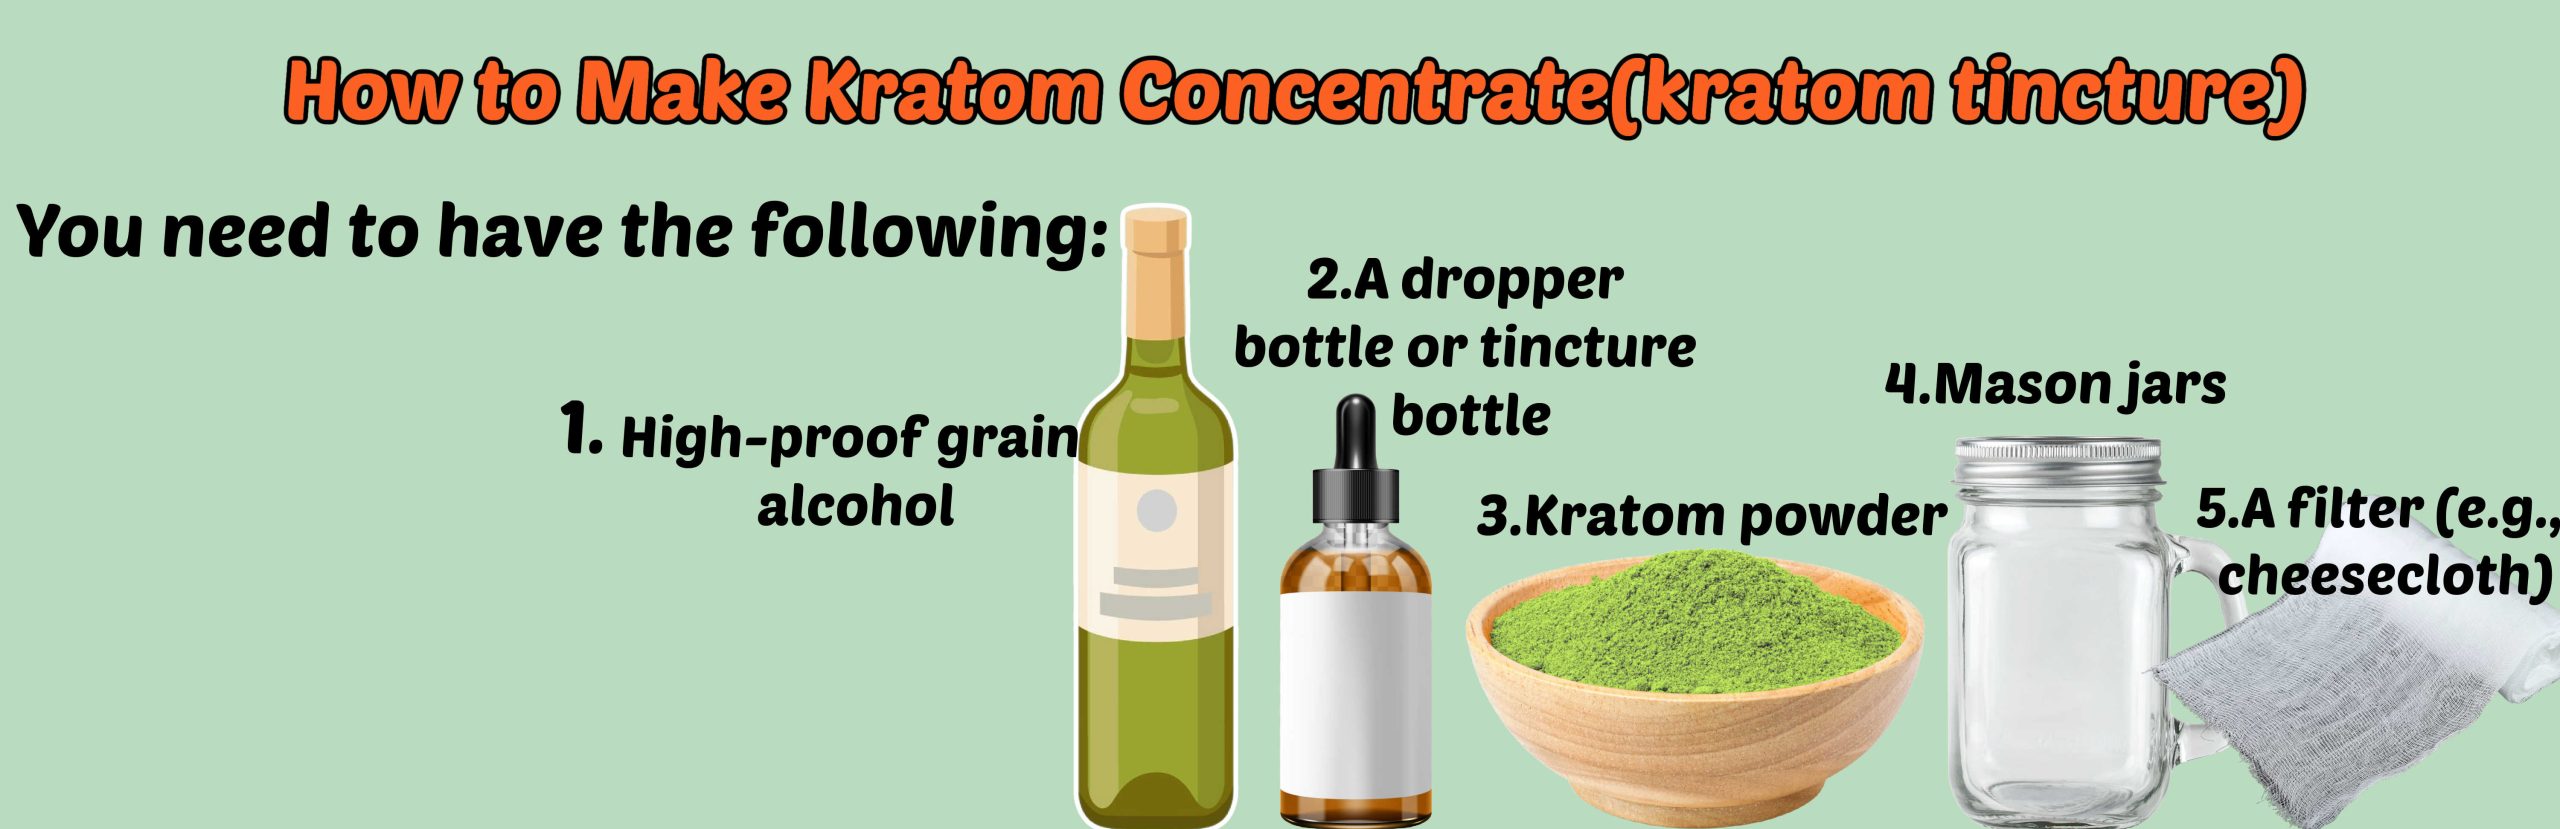 image of what you'll need to make kratom concentrate